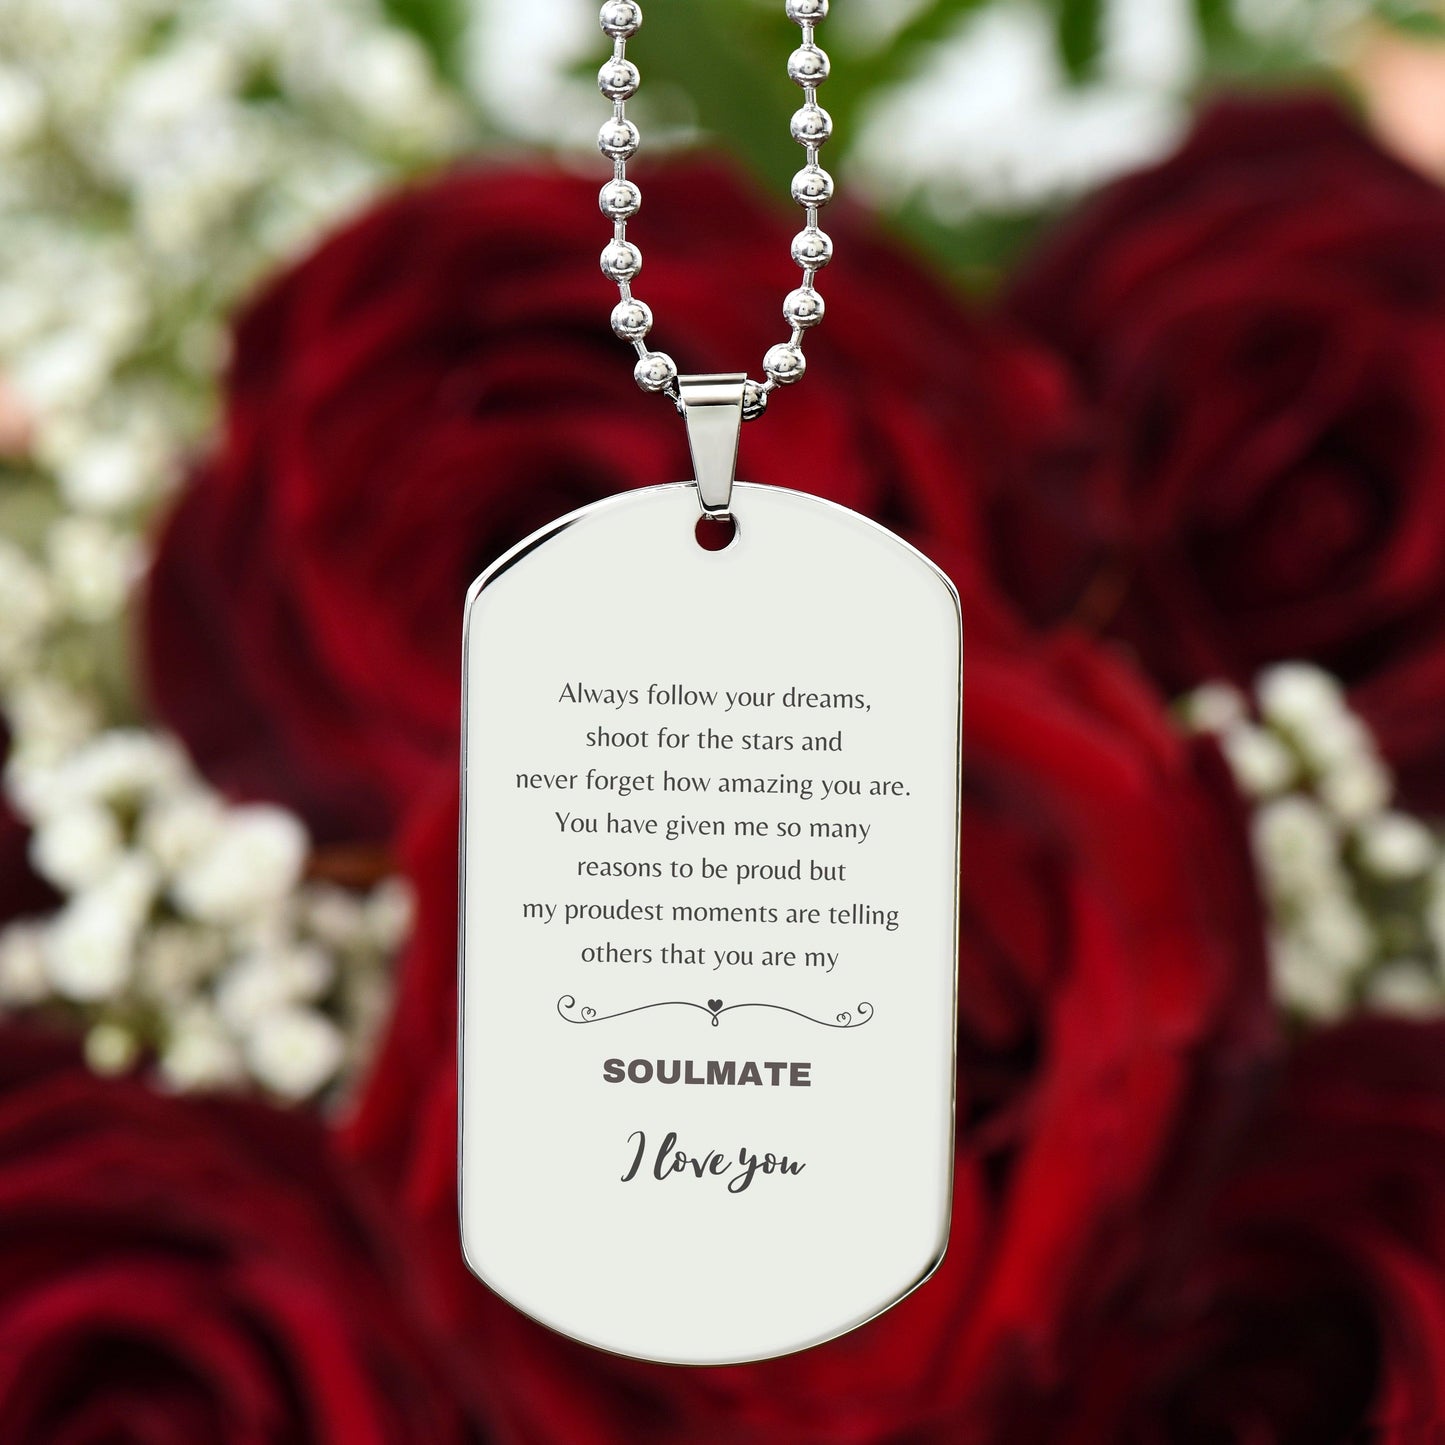 Motivational Soulmate Engraved Silver Dog Tag Necklace - Always follow your dreams, never forget how amazing you are- Birthday, Christmas Holiday Gifts - Mallard Moon Gift Shop